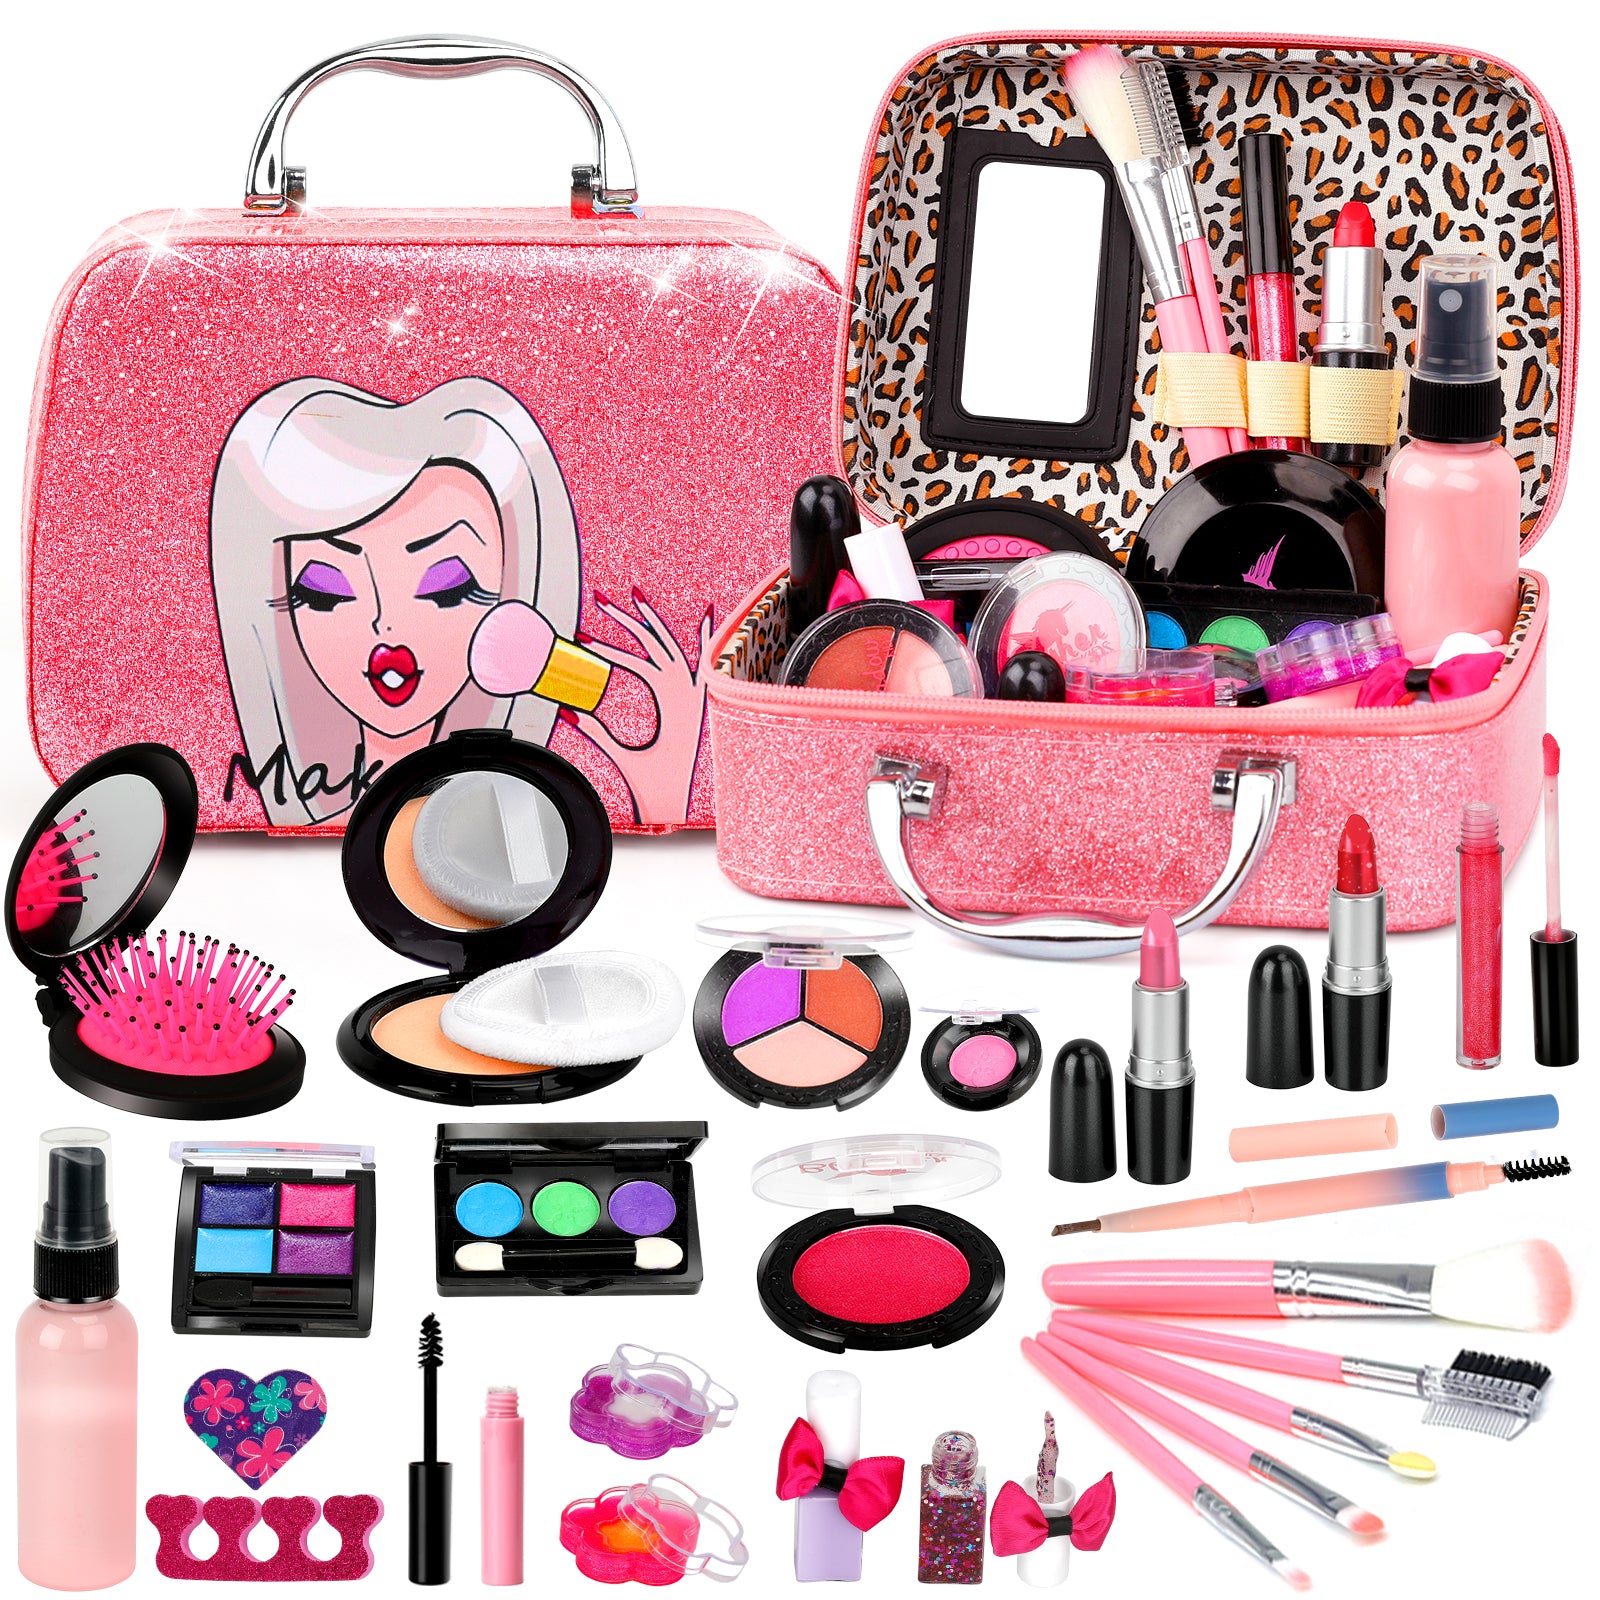 Kids Makeup Kit for Girl - 39 Pcs Safe and Easy to Wash Makeup Toy for Girls, Re